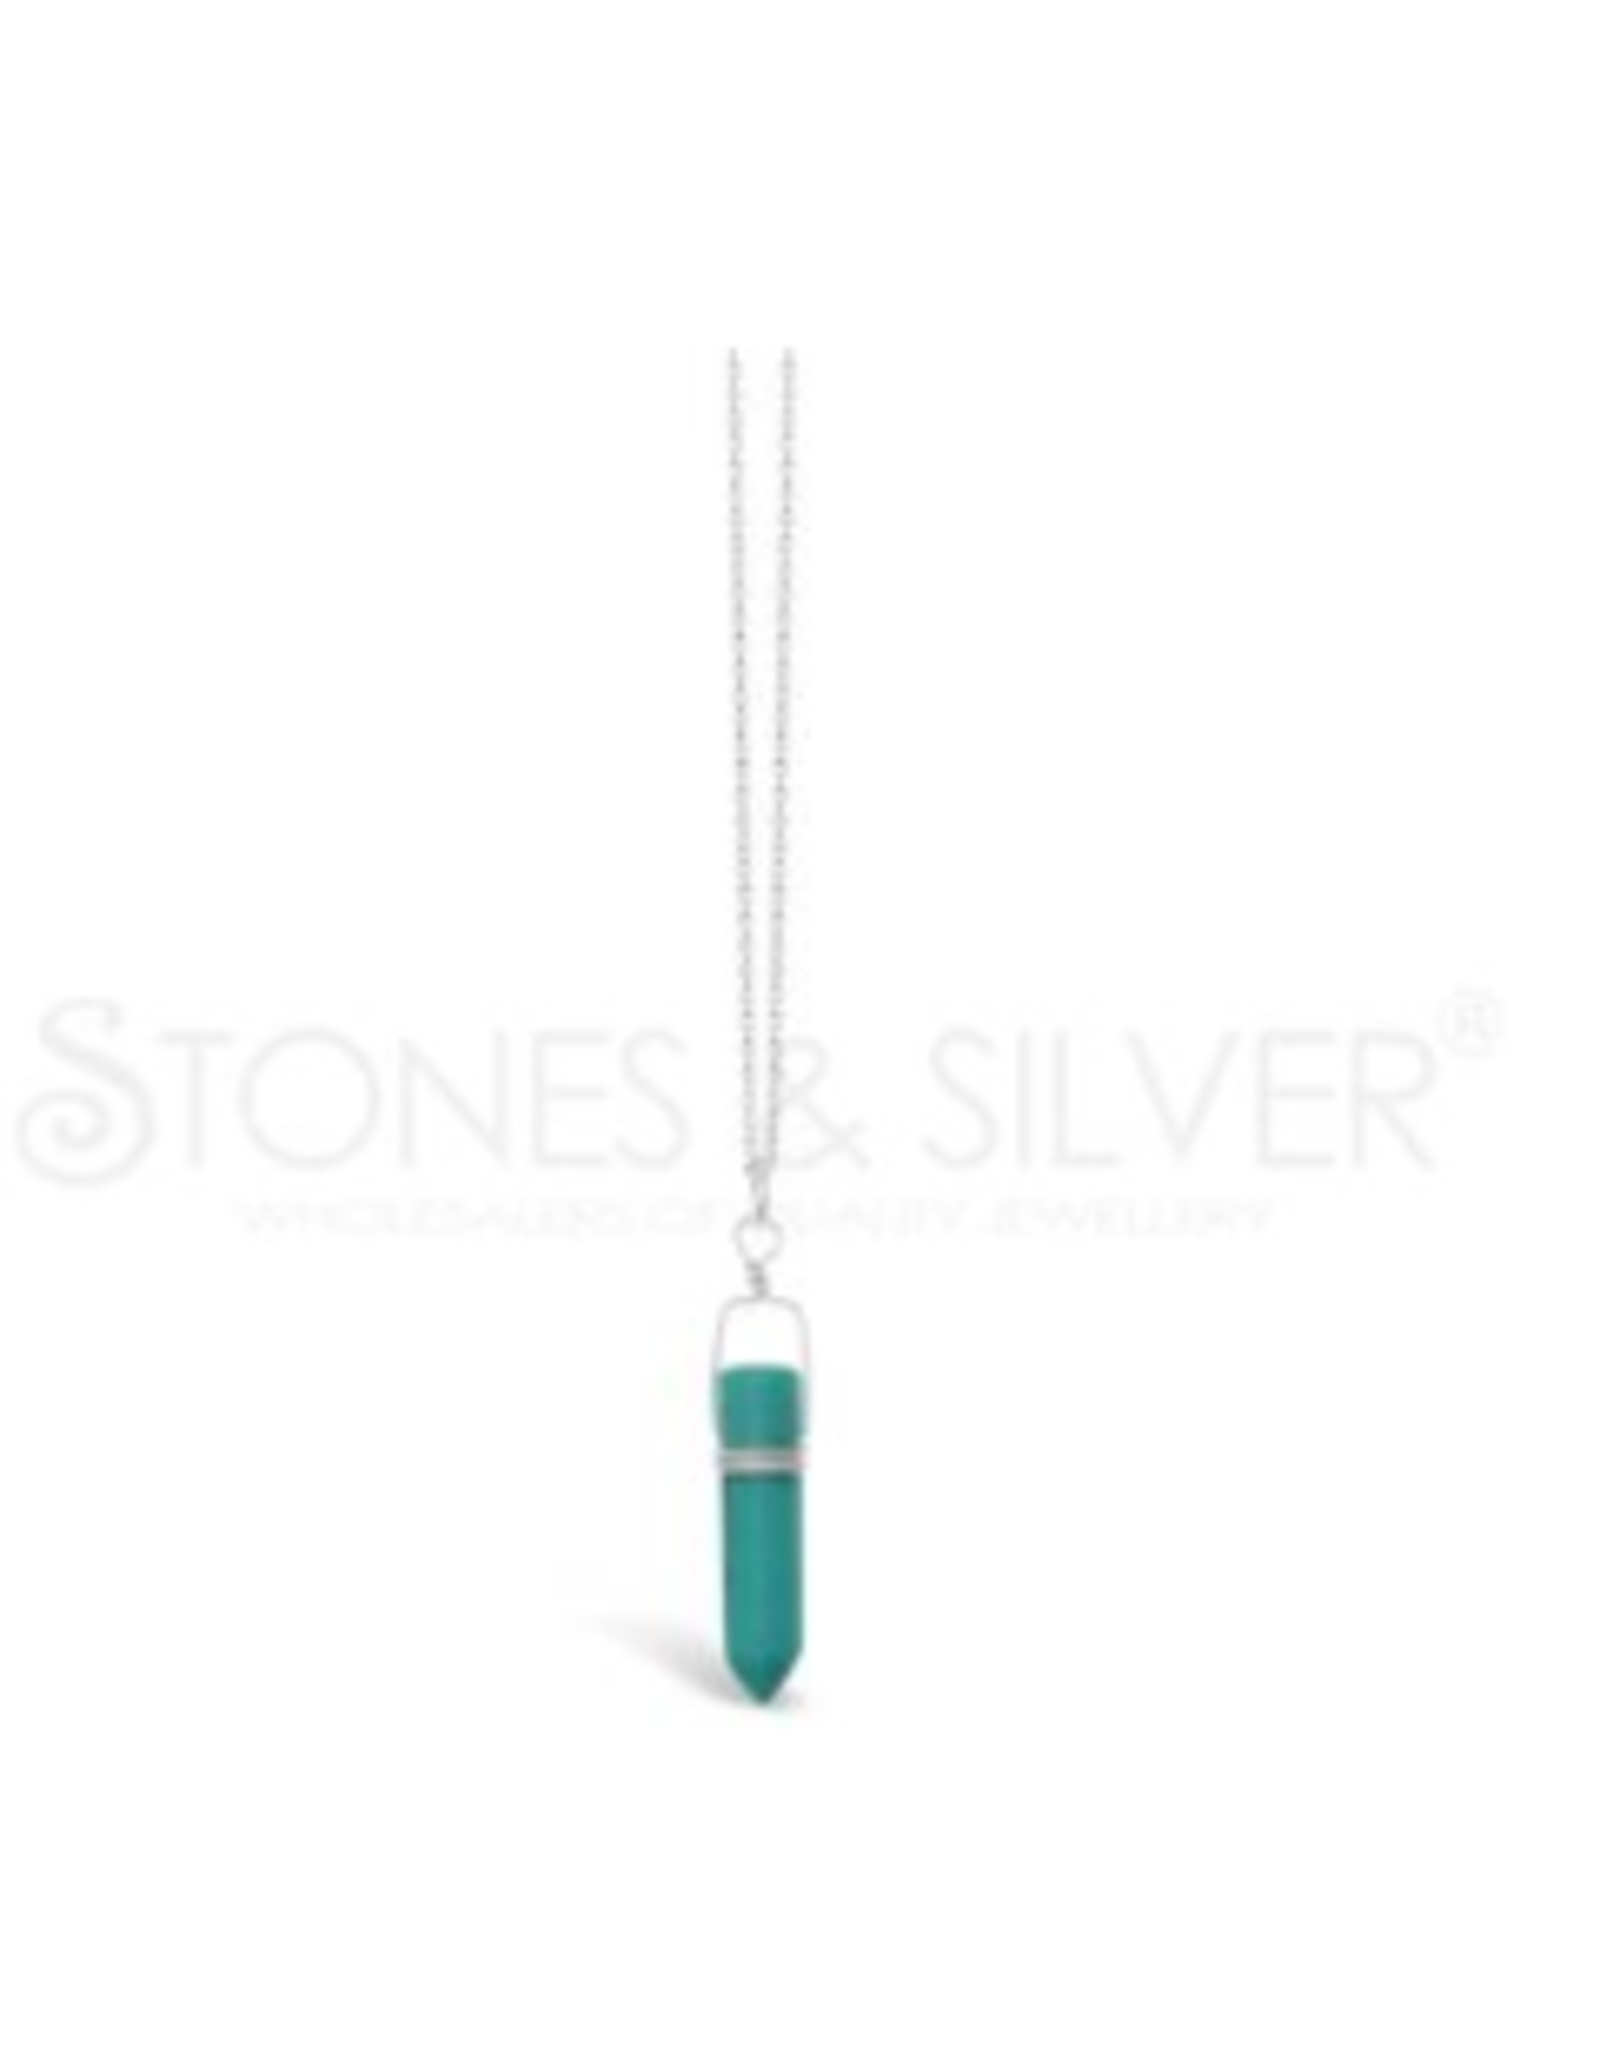 Stones & Silver Turquoise Point Necklace 45cm